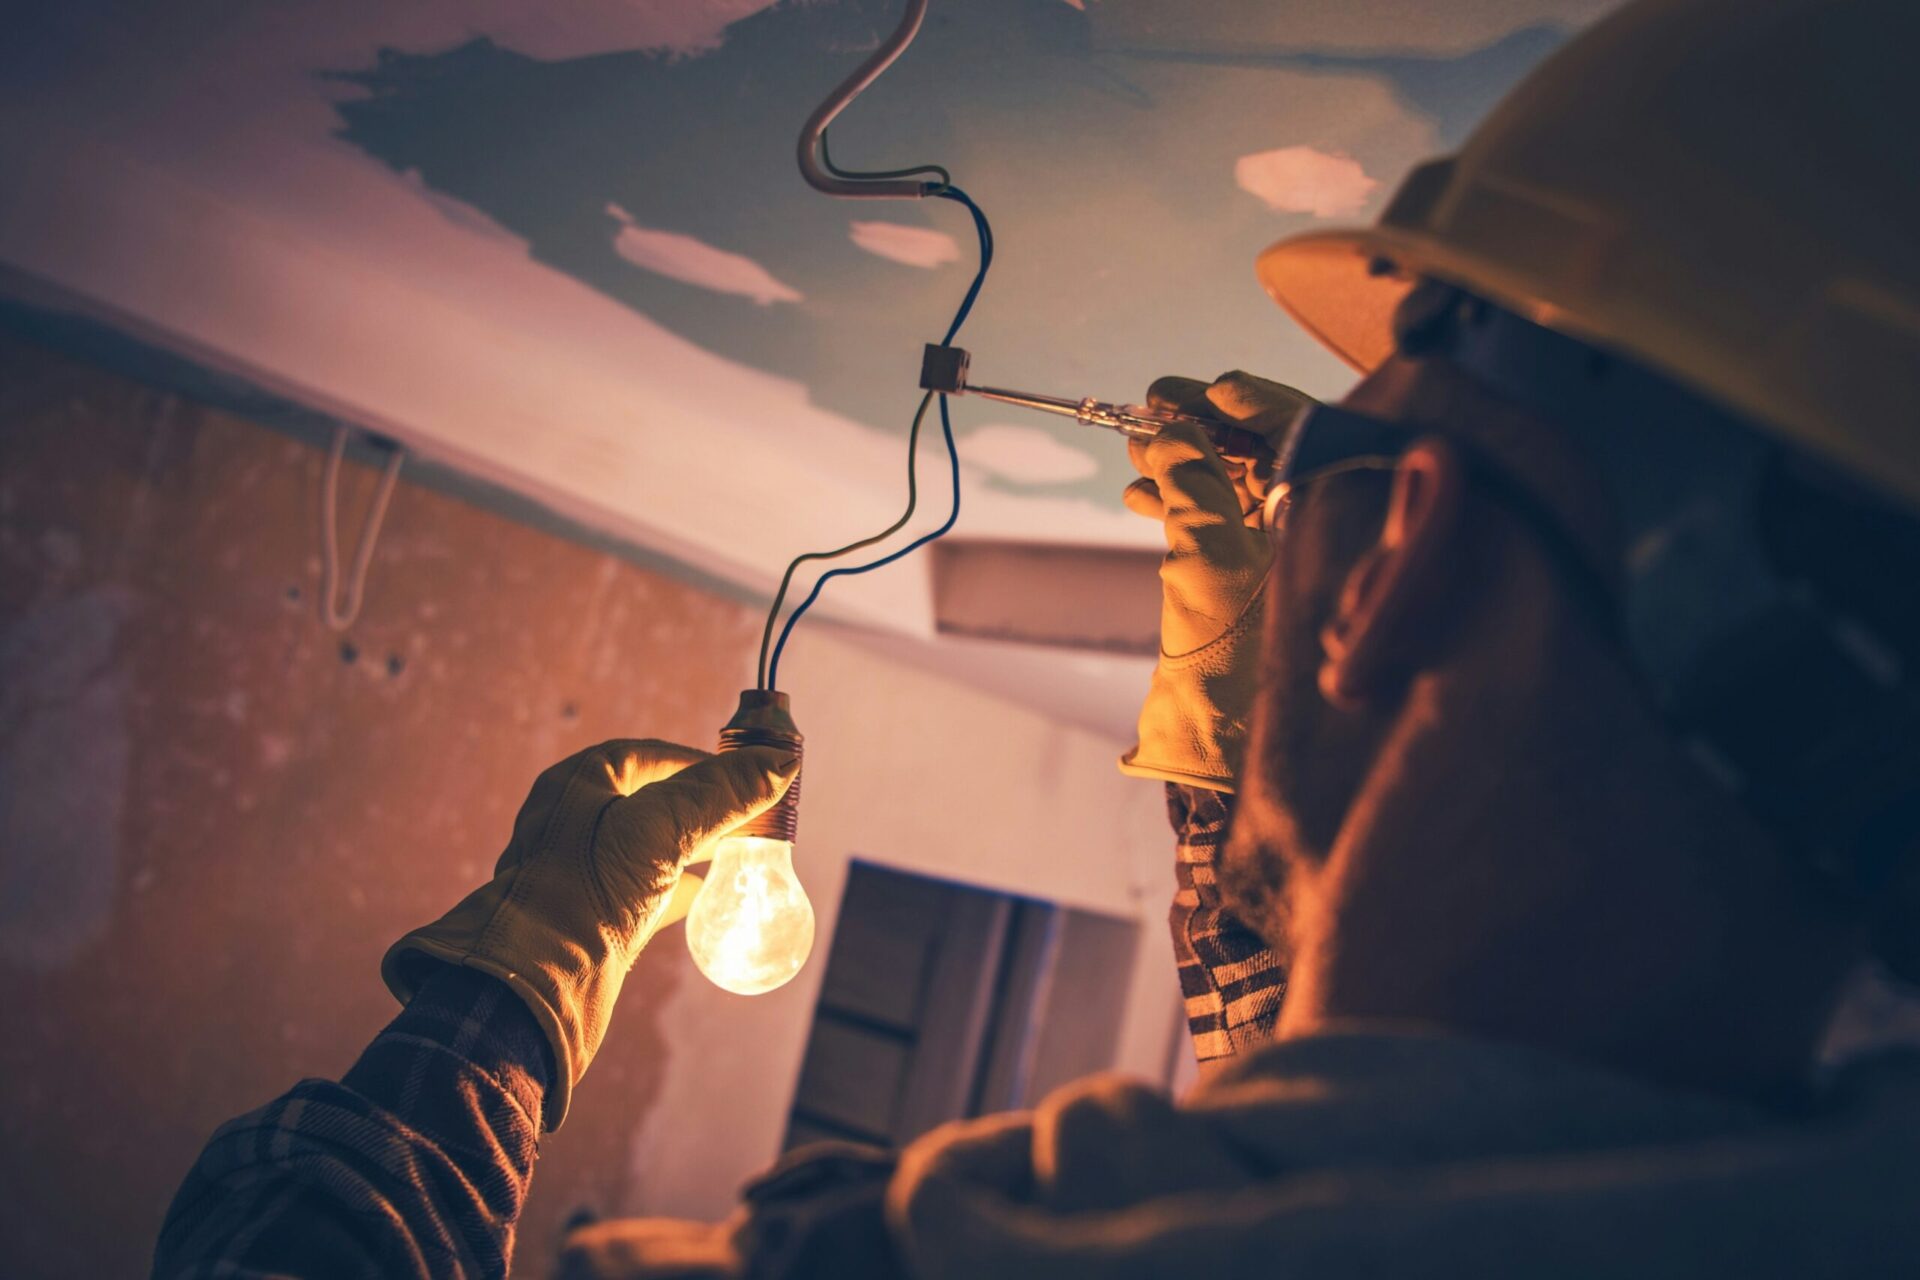 A technician repairs an electrical issue with a lightbulb